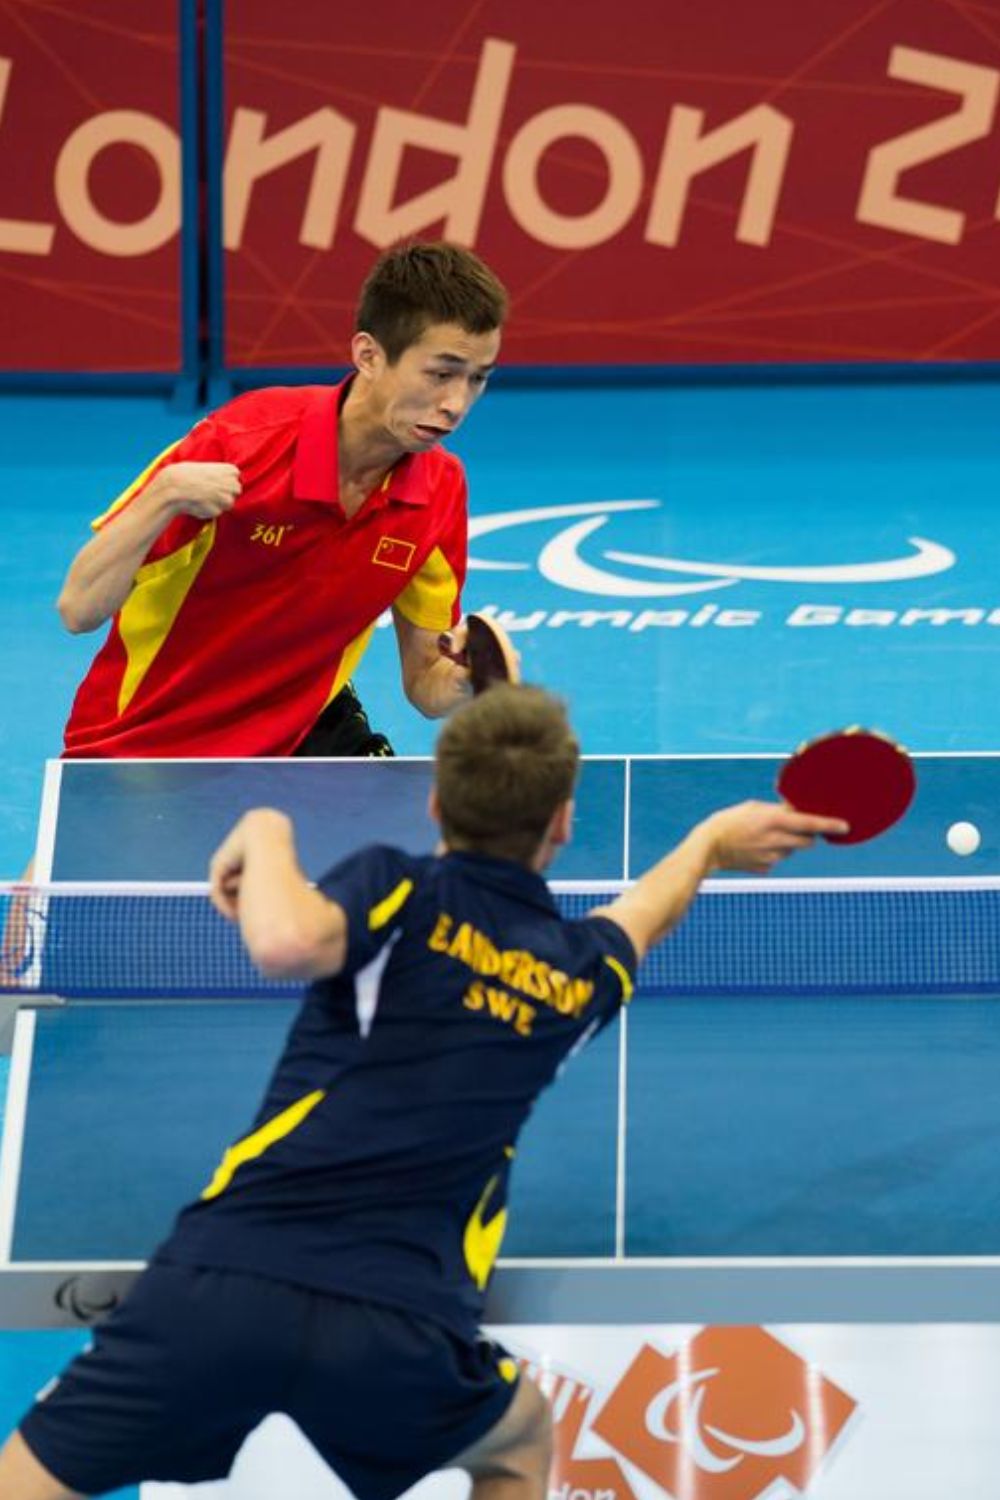 Table Tennis (Source: International Paralympic Committee)